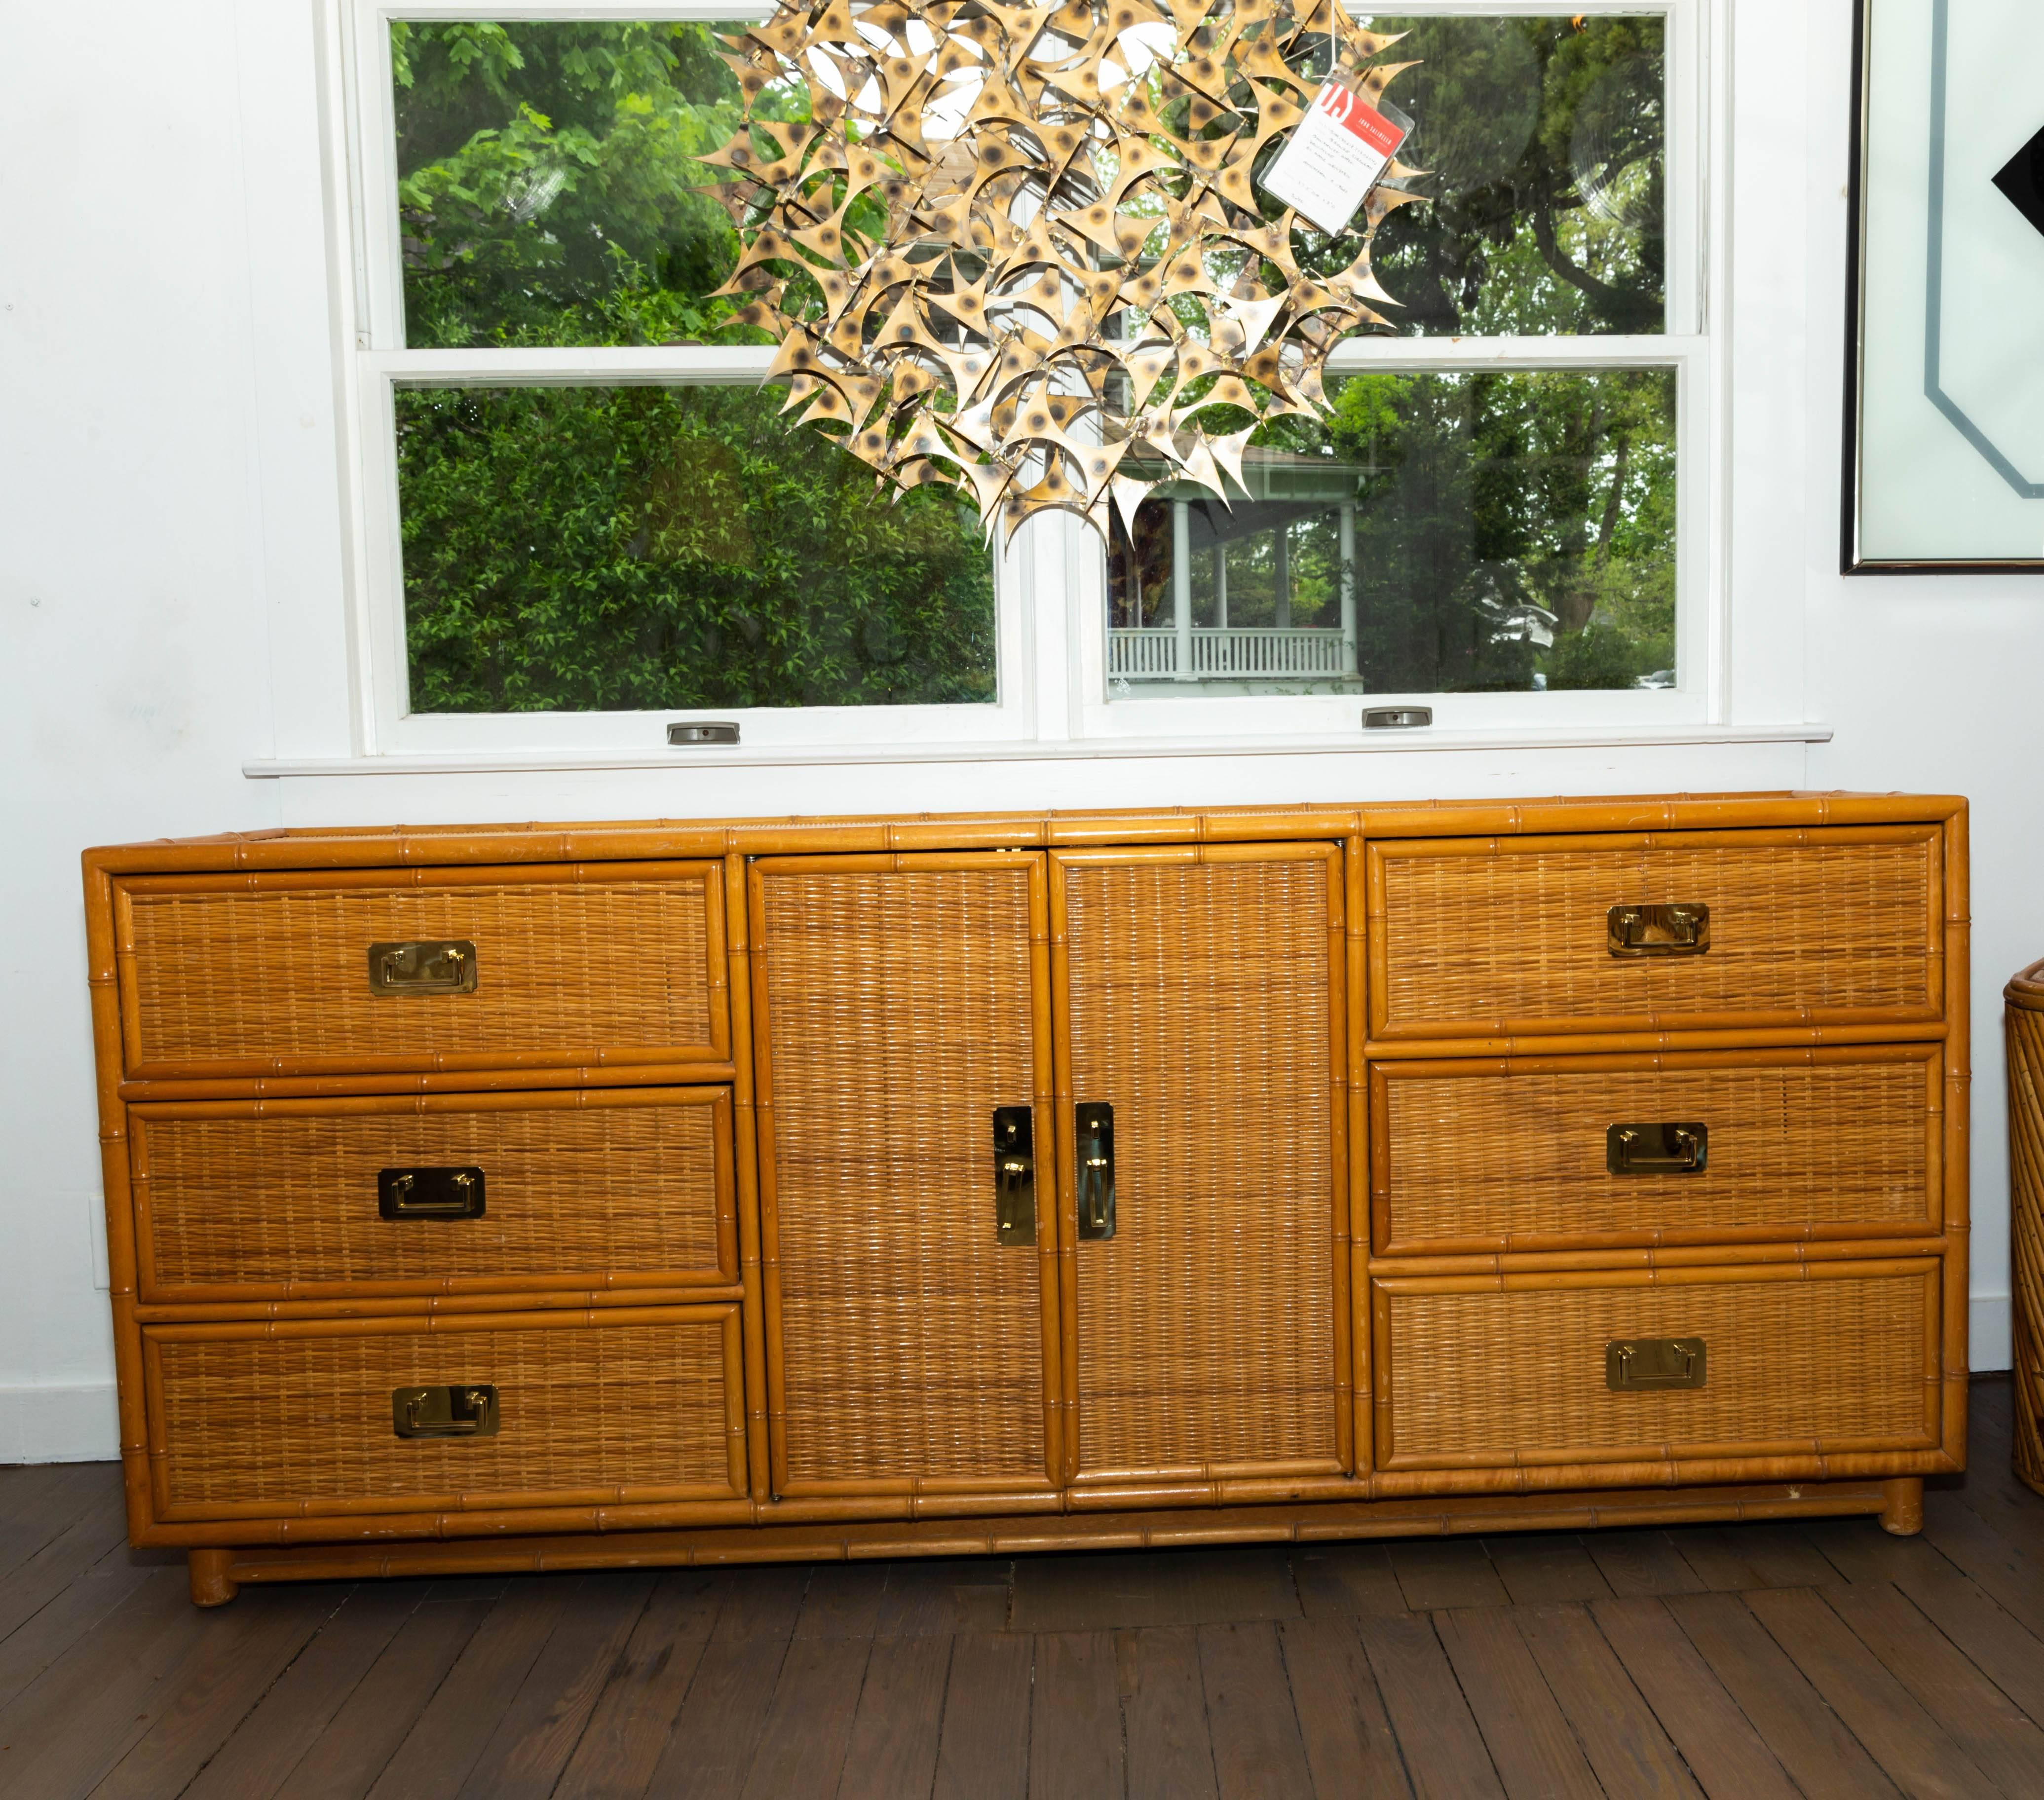 Bamboo and reed cabinet with brass hardware.